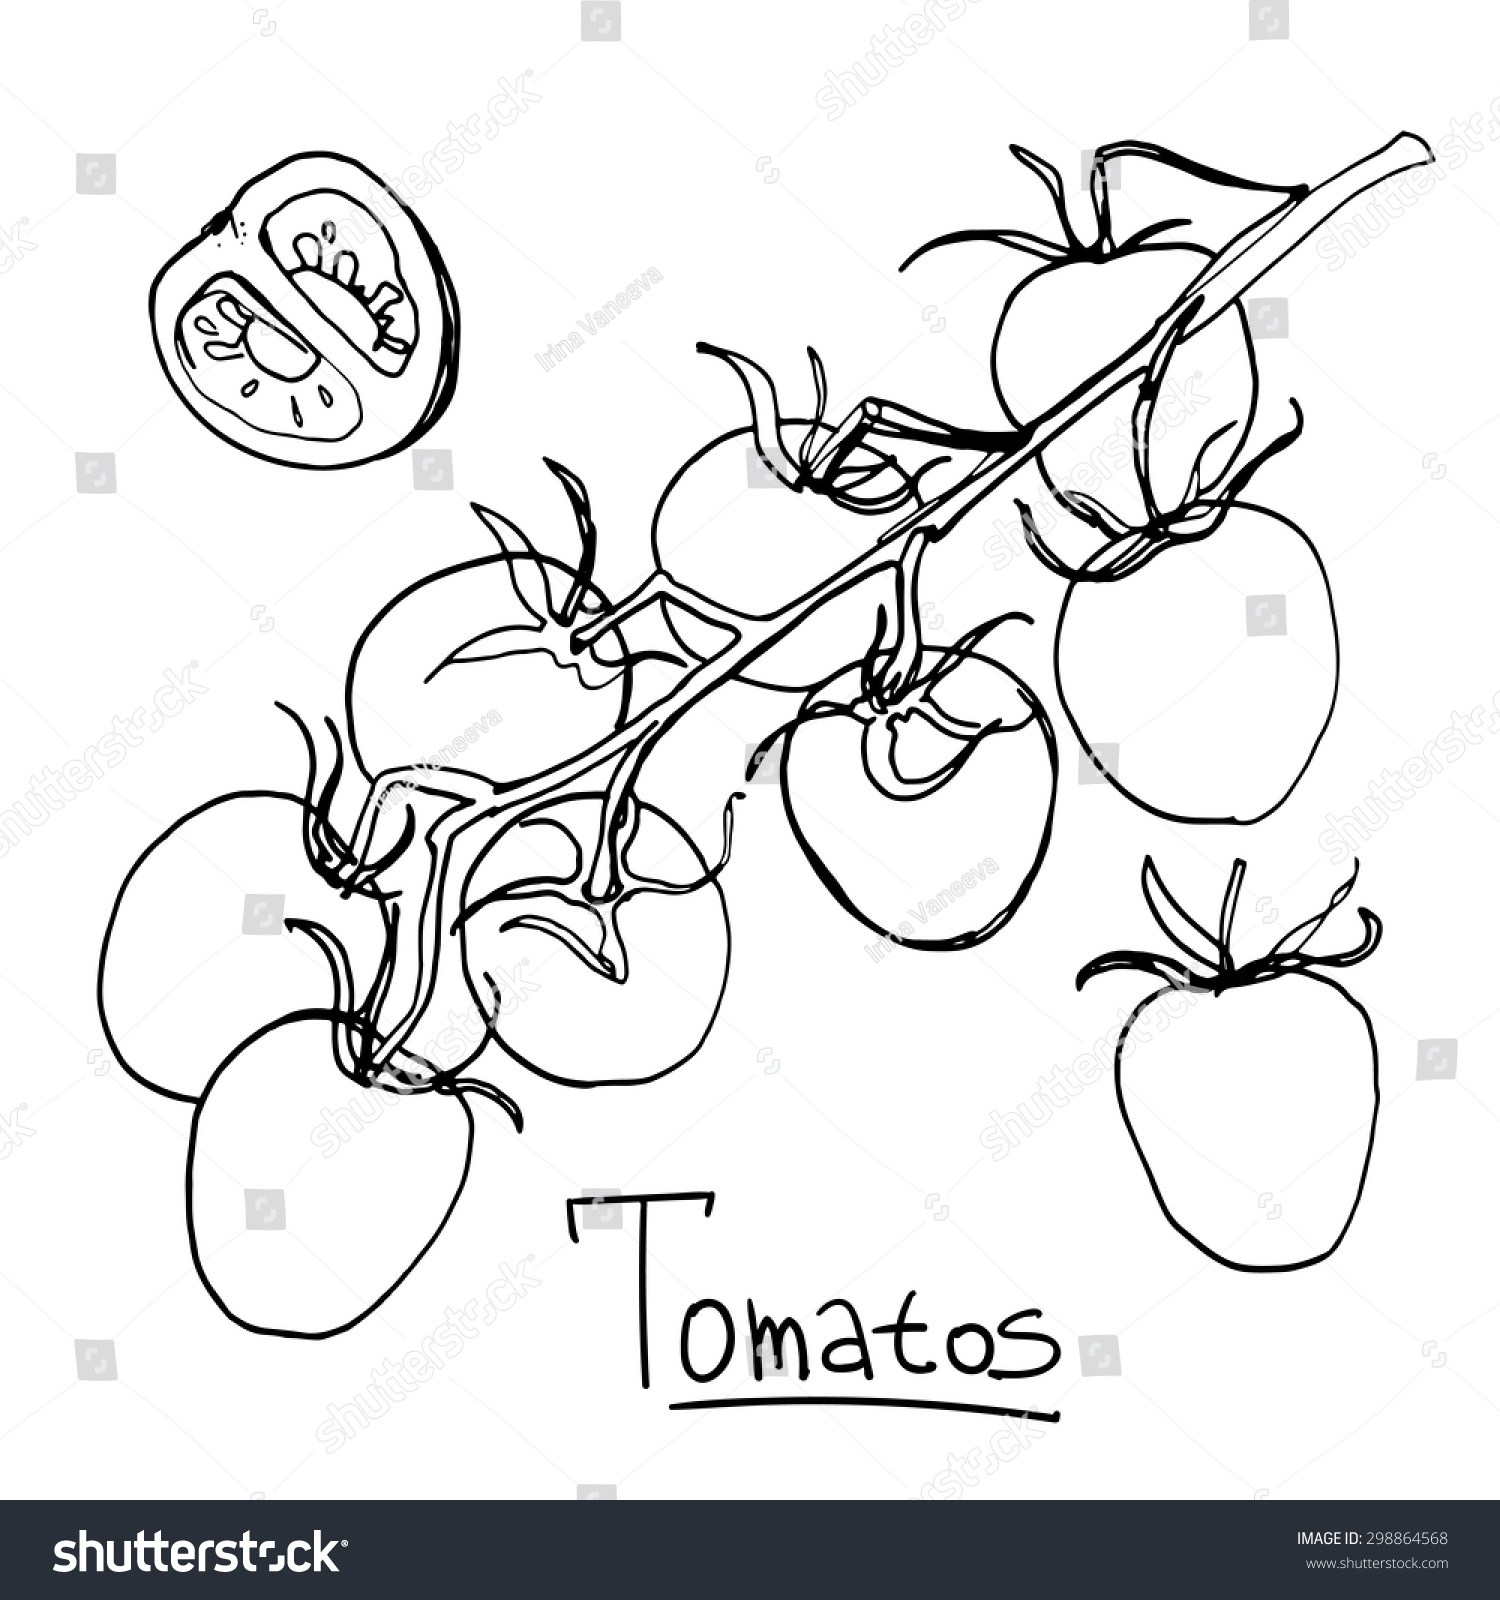 Tomatoes Line Drawn On A White Background. Vector Sketch Of The Fruit